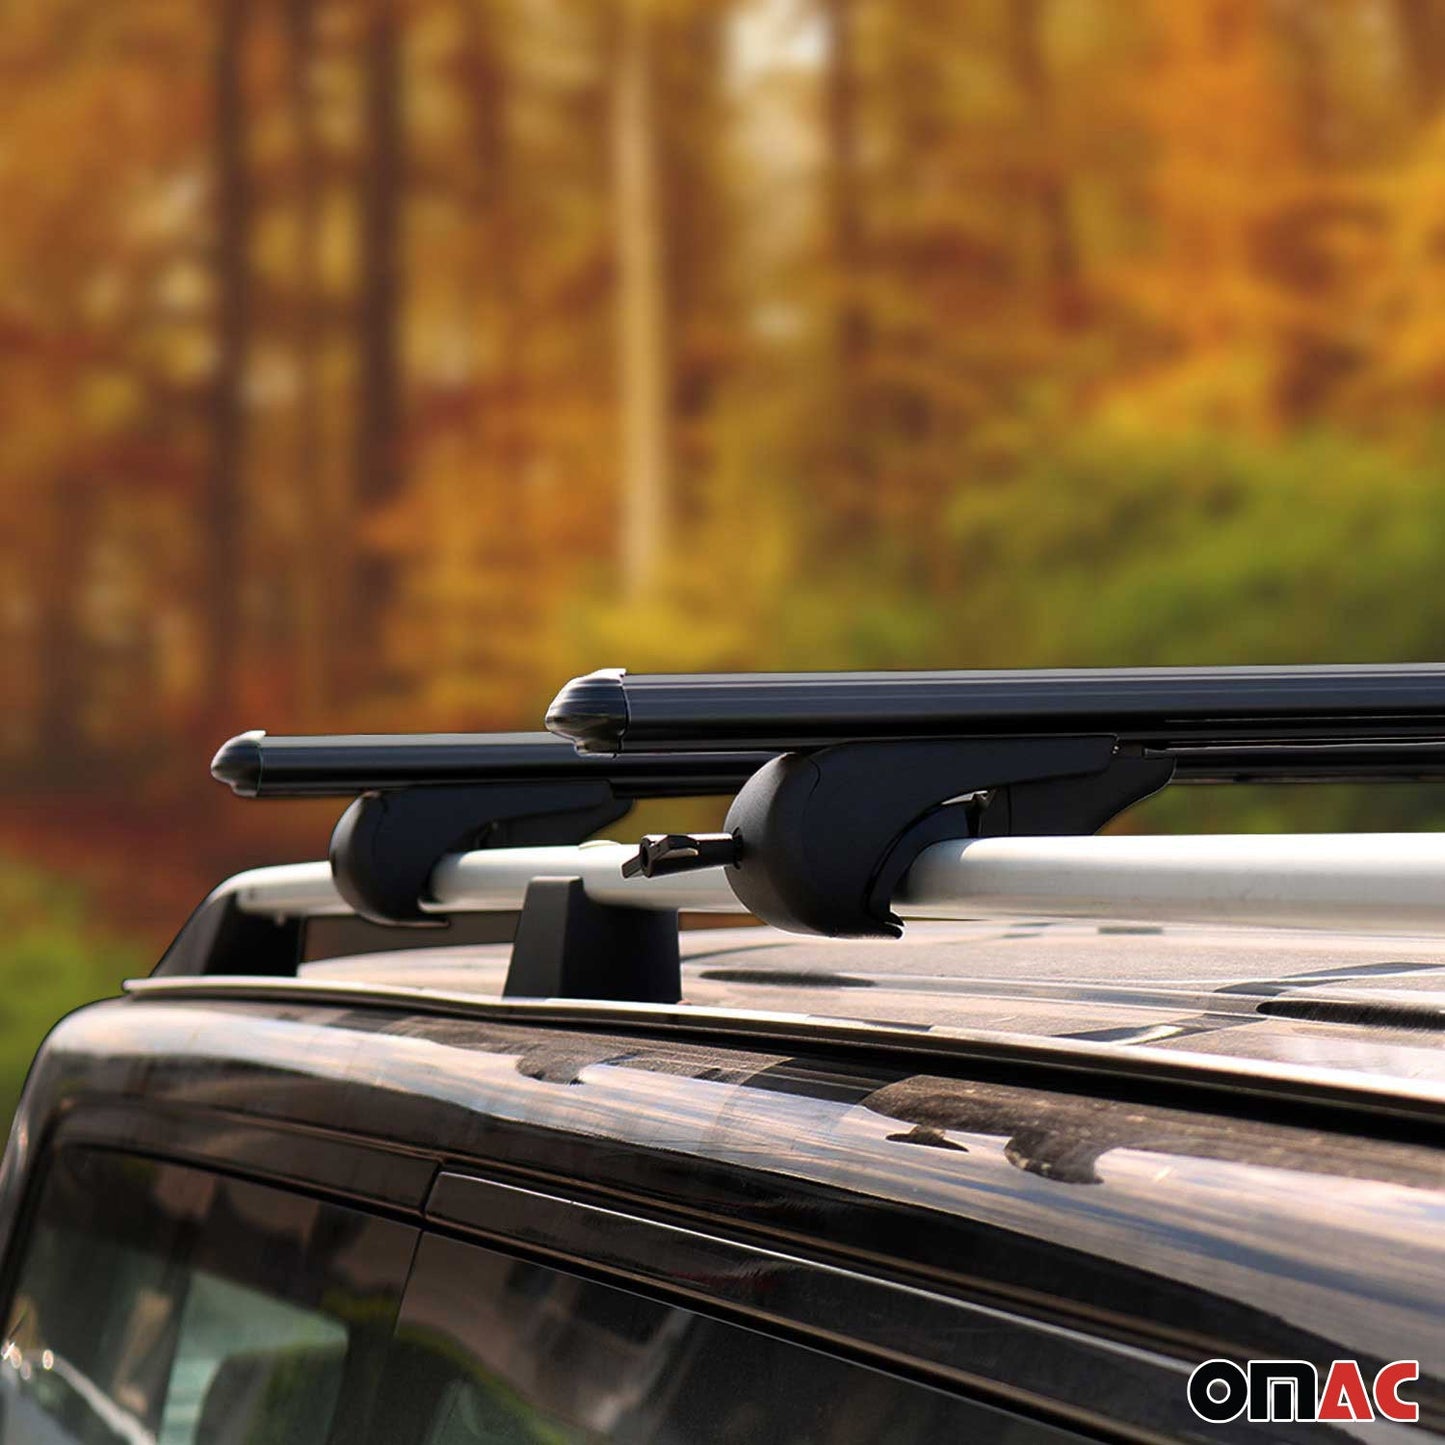 OMAC Roof Rack Cross Bars Luggage Carrier Black for BMW 5 Series E61 2004-2010 12129696929MB